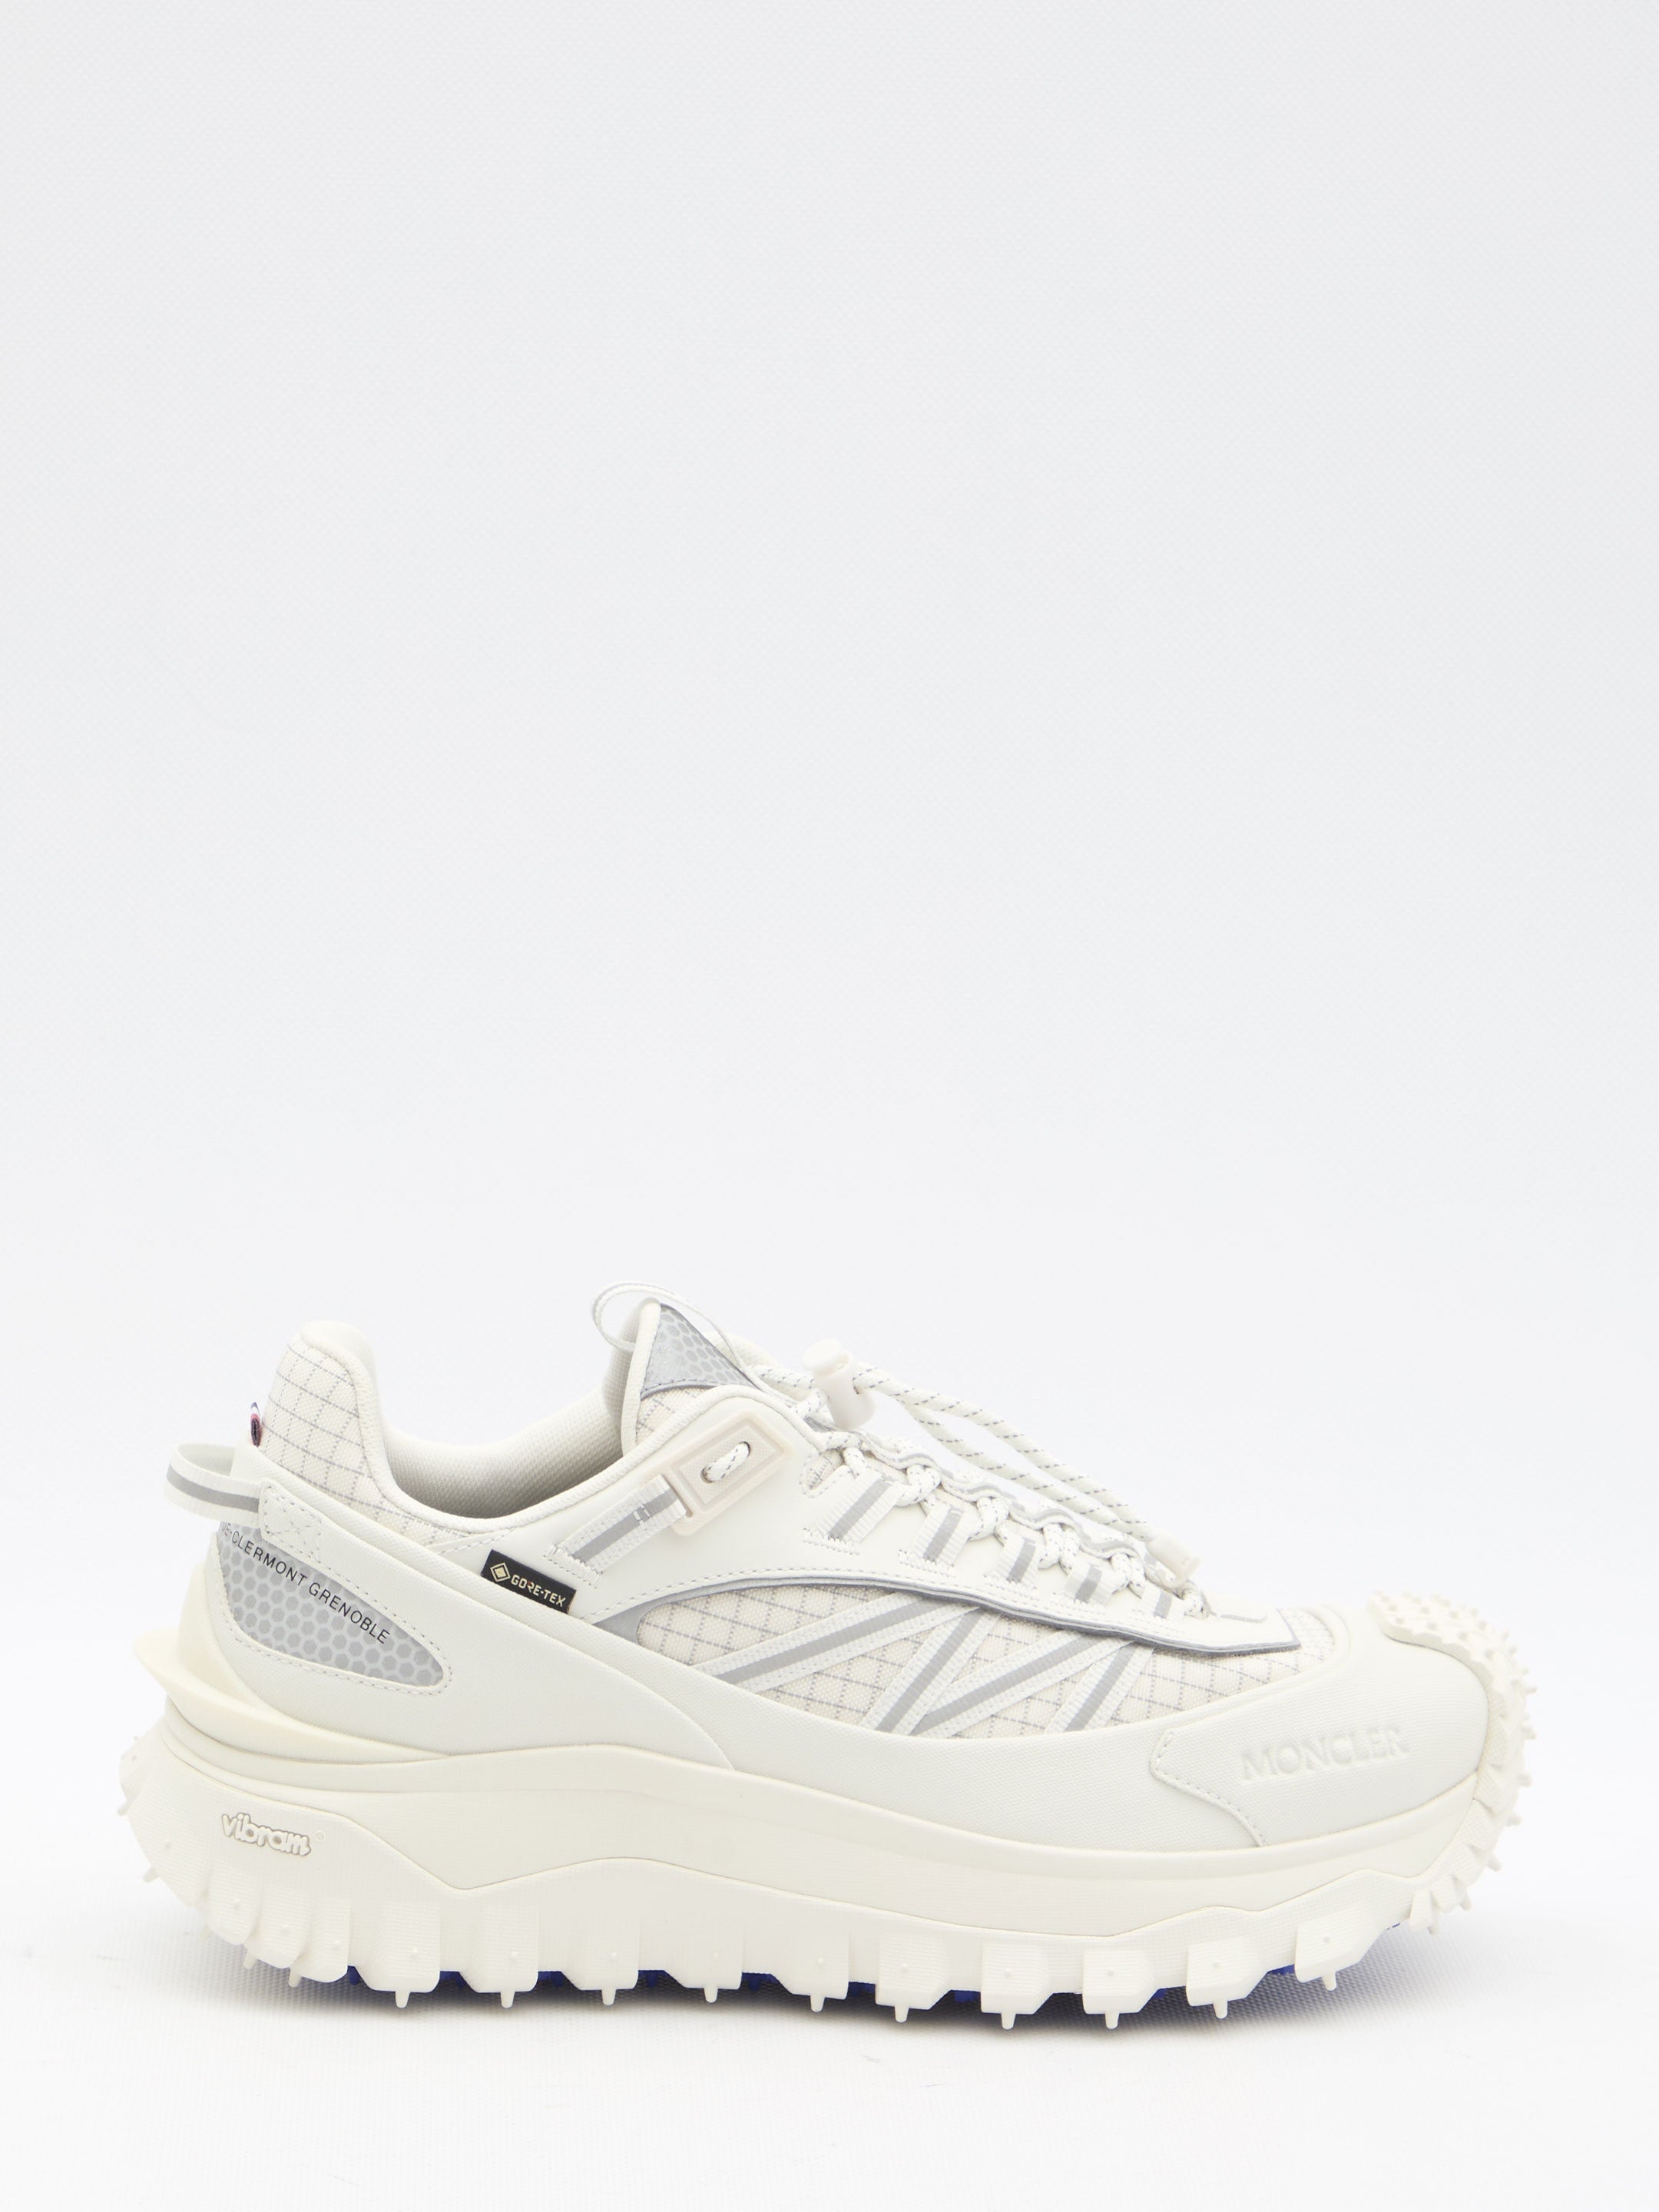 MONCLER-OUTLET-SALE-Trailgrip-GTX-sneakers-Sneakers-44-WHITE-ARCHIVE-COLLECTION.jpg